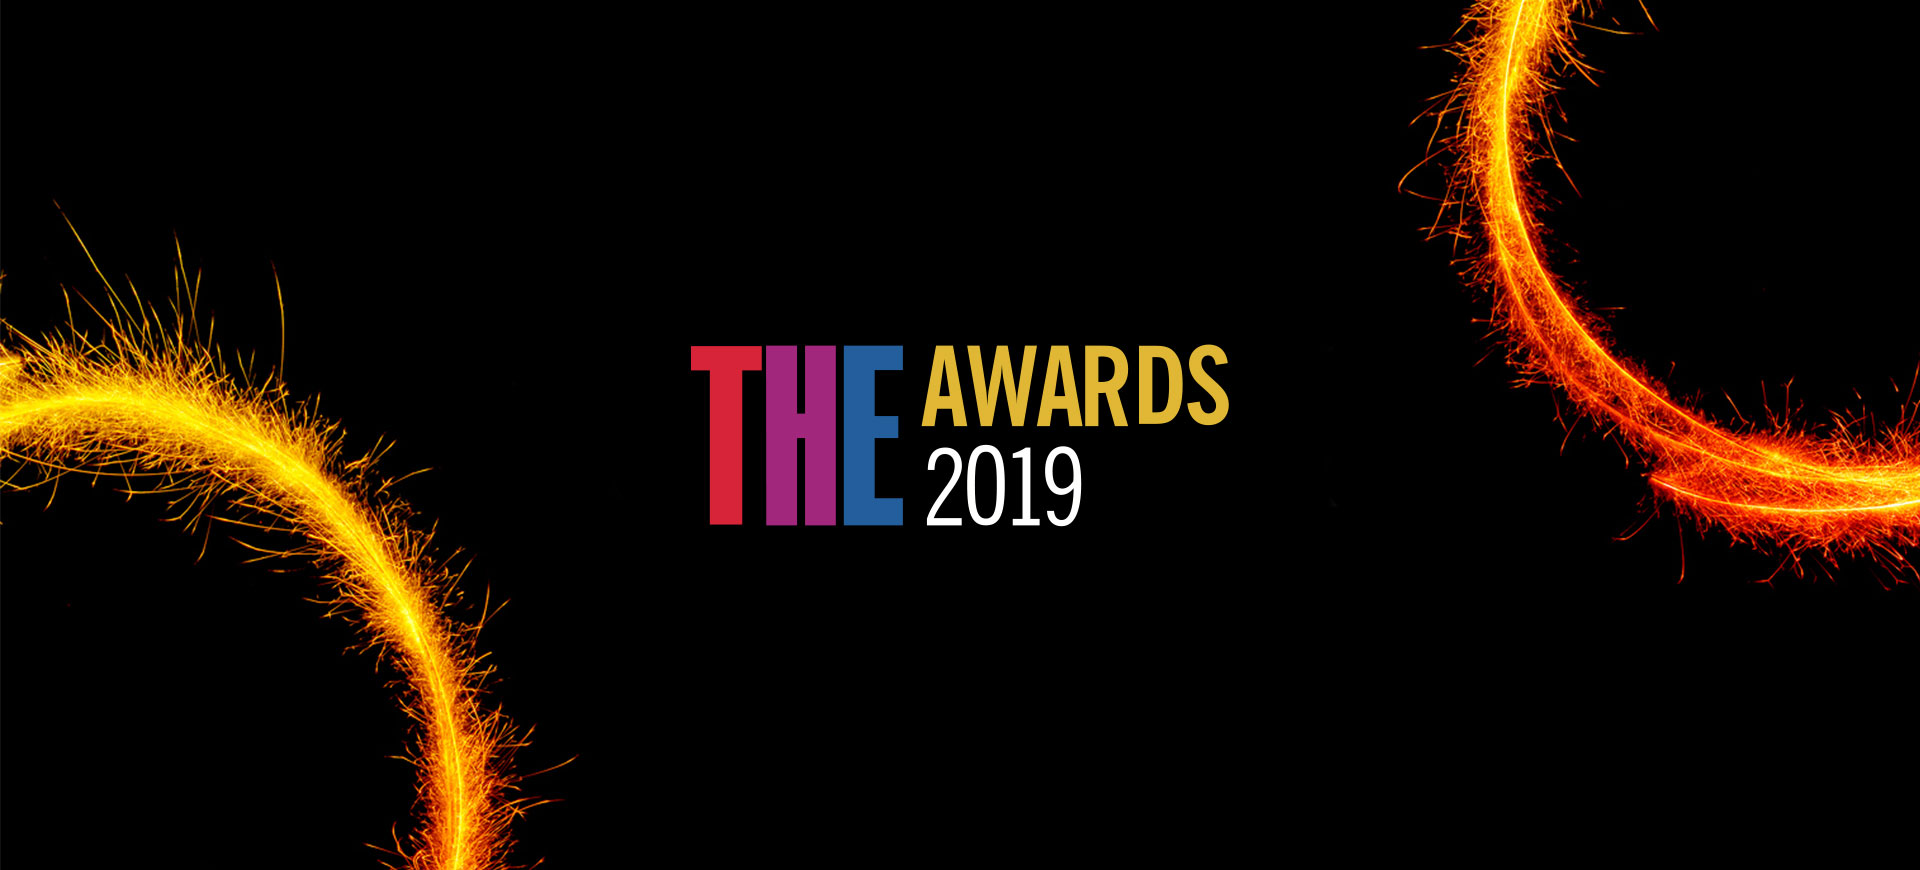 THE awards university of the year 2019